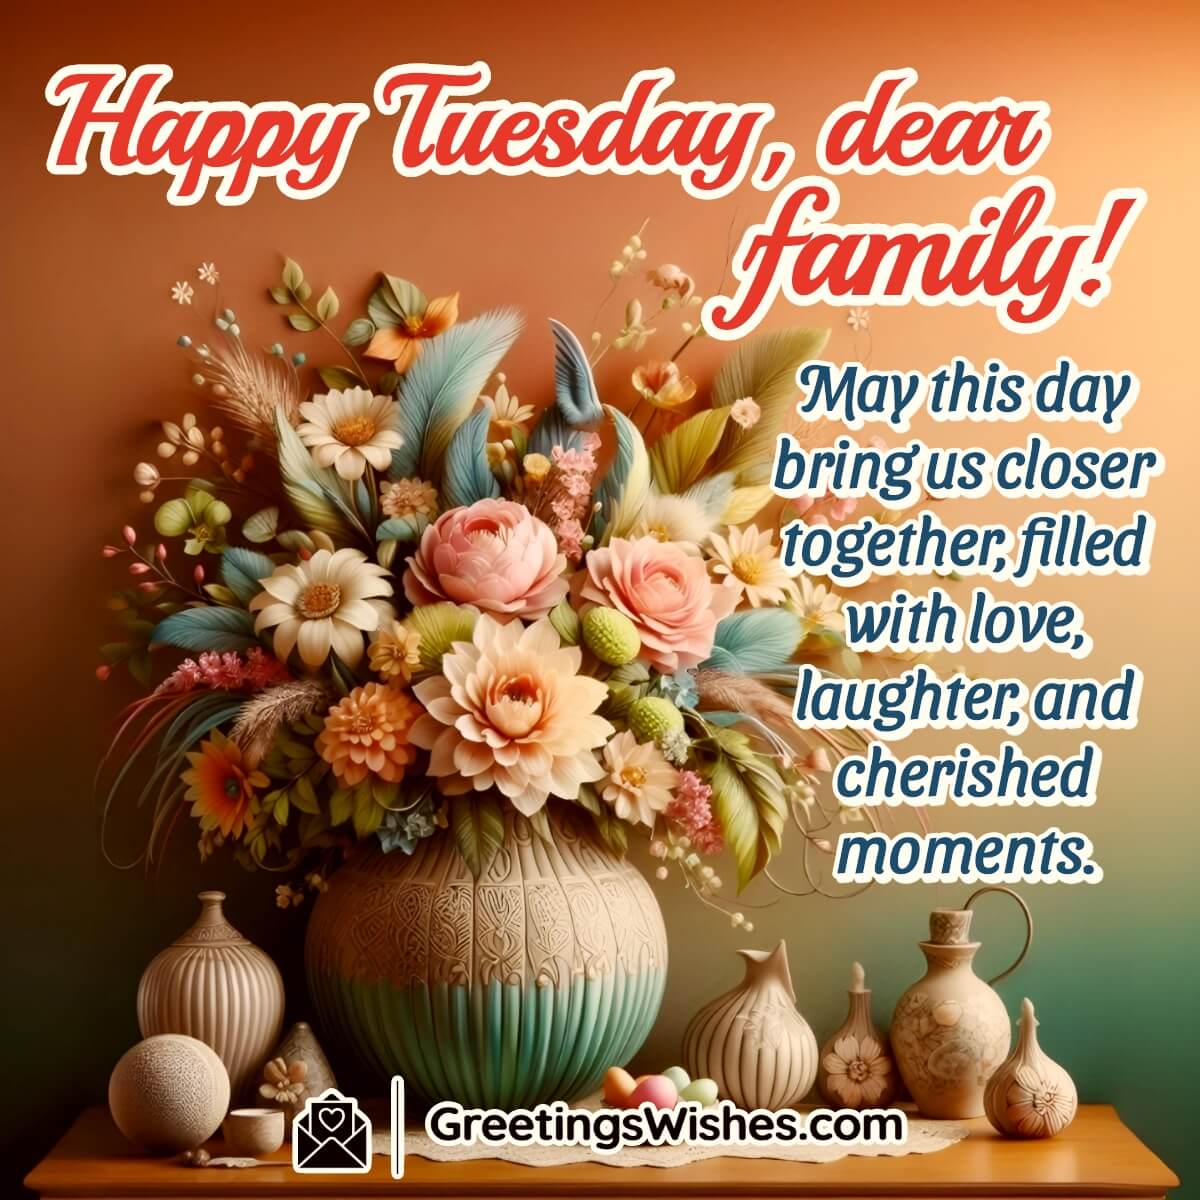 Tuesday Messages For Family